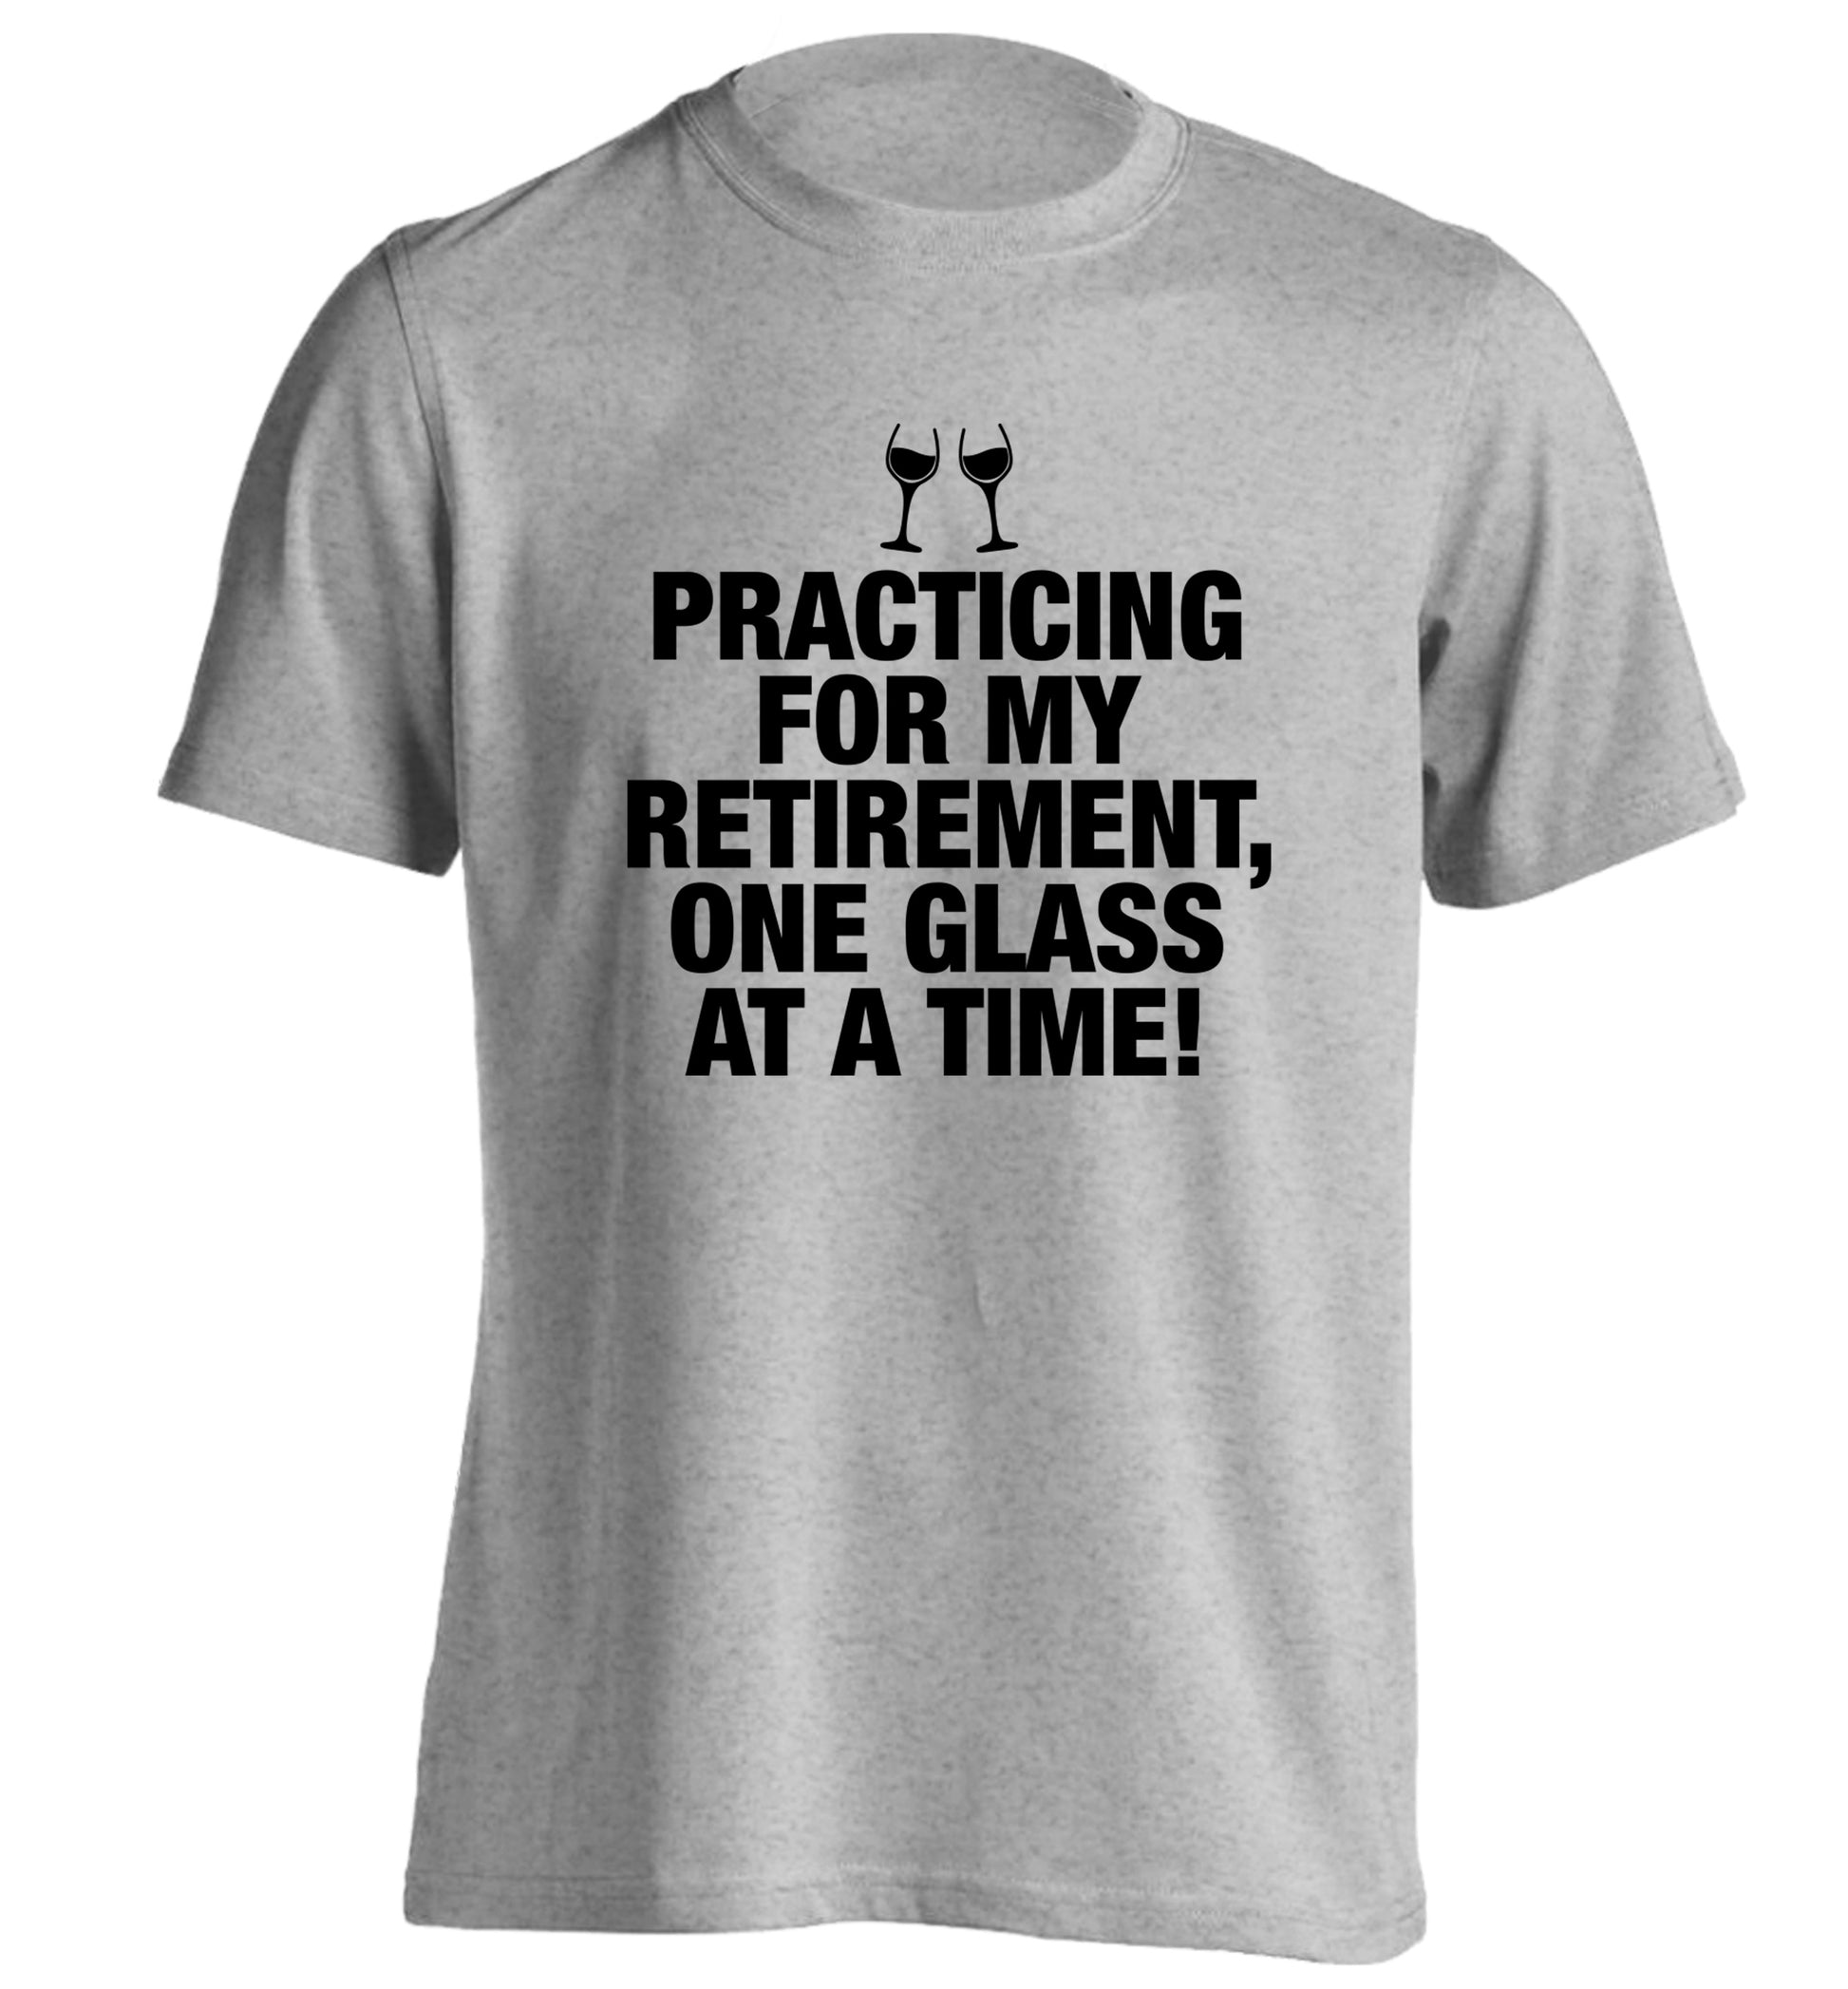 Practicing my retirement one glass at a time adults unisex grey Tshirt 2XL